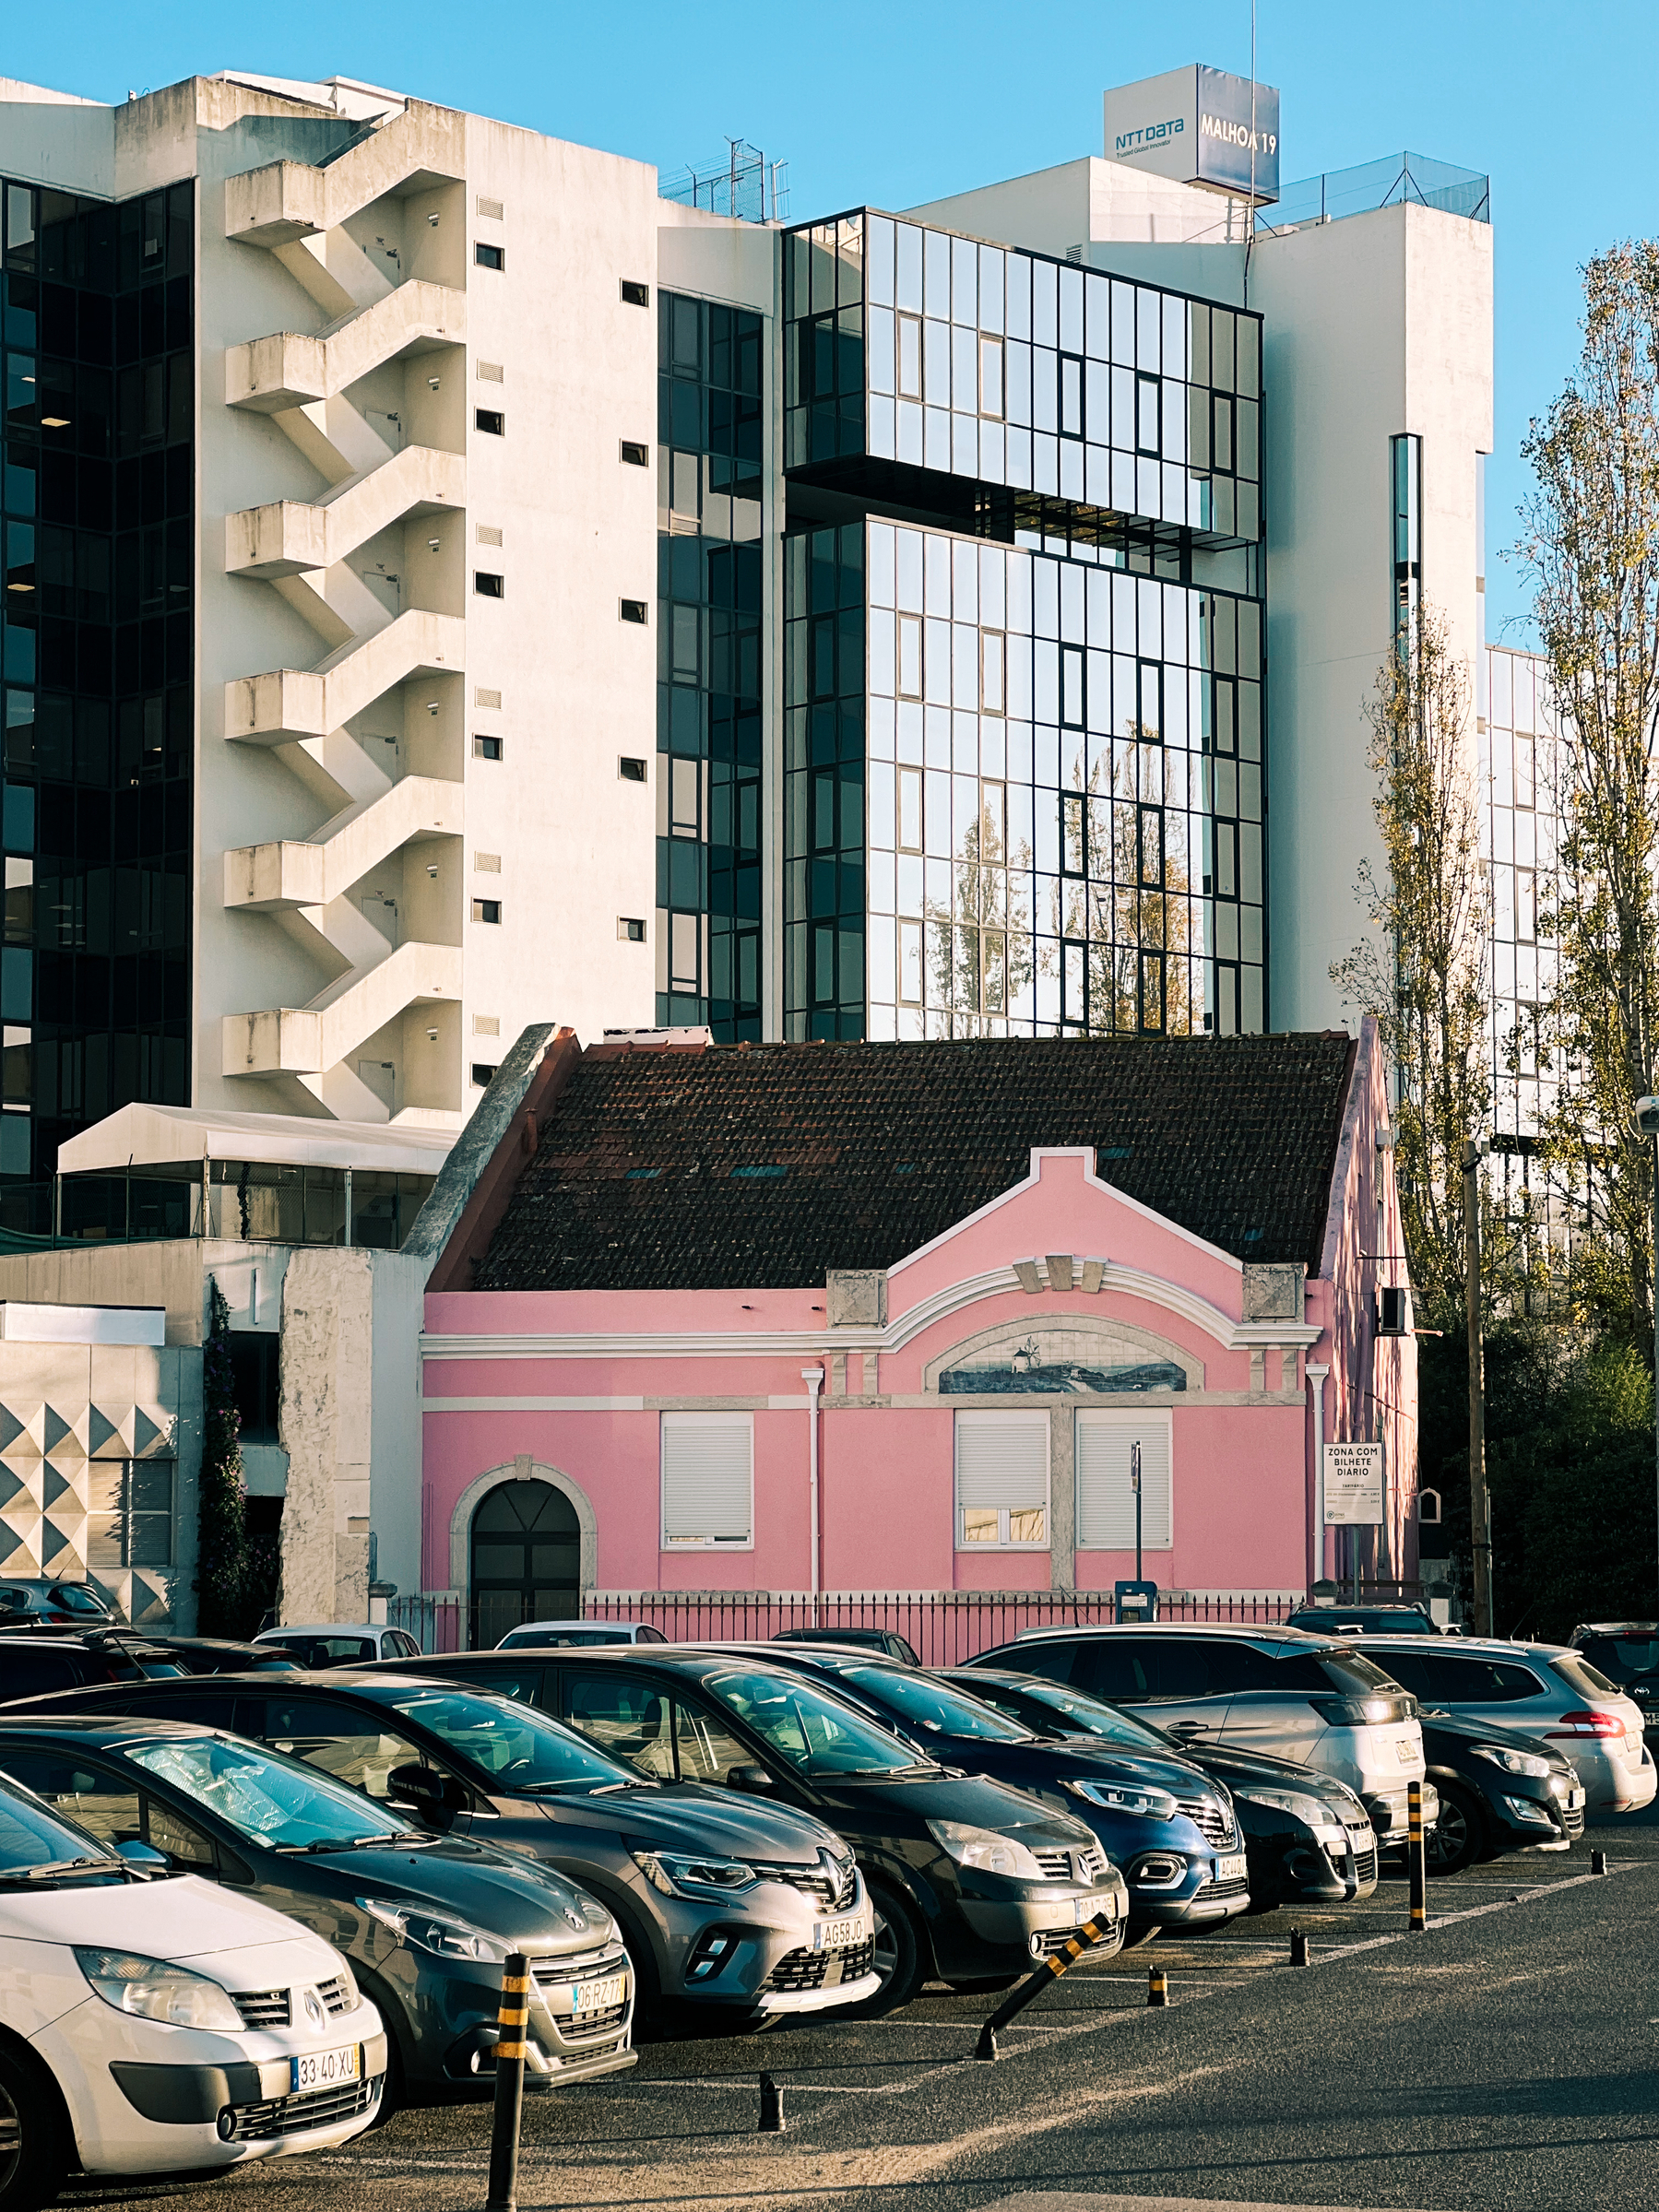 An old pink house stands in the middle of a parking lot, surrounded by modern looking buildings. 